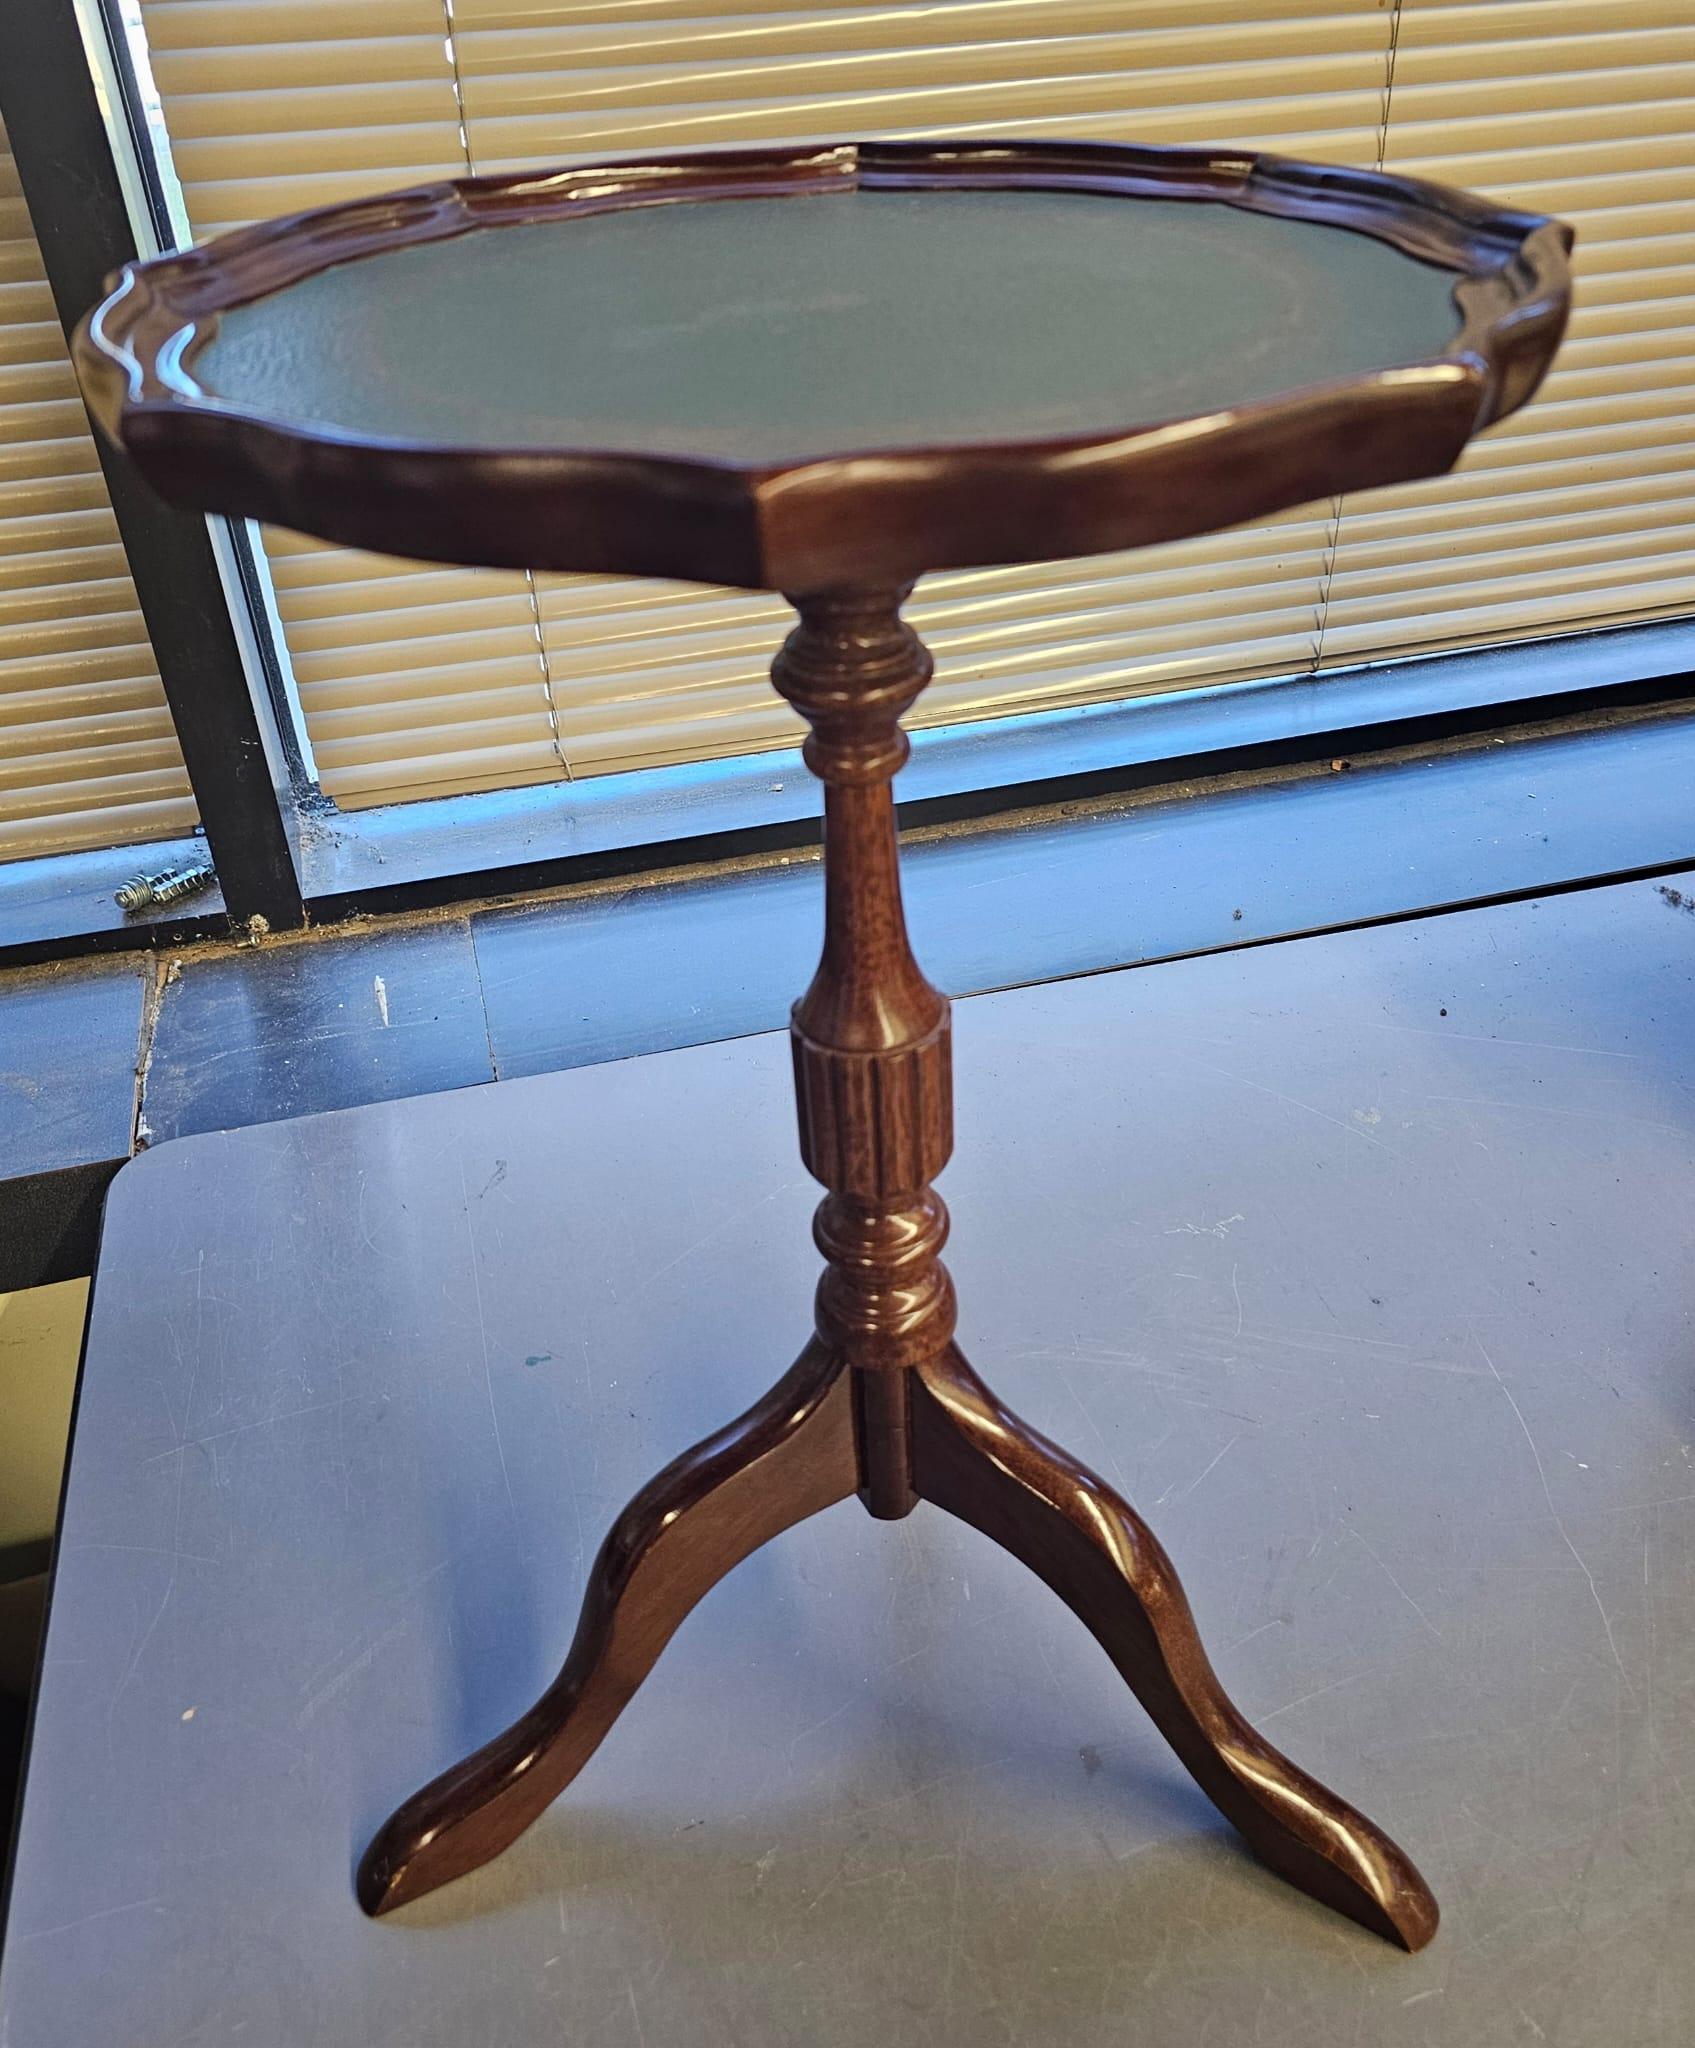 20th Century Pedestal Mahogany and Leather Top Inset Candle Stand In Good Condition For Sale In Germantown, MD